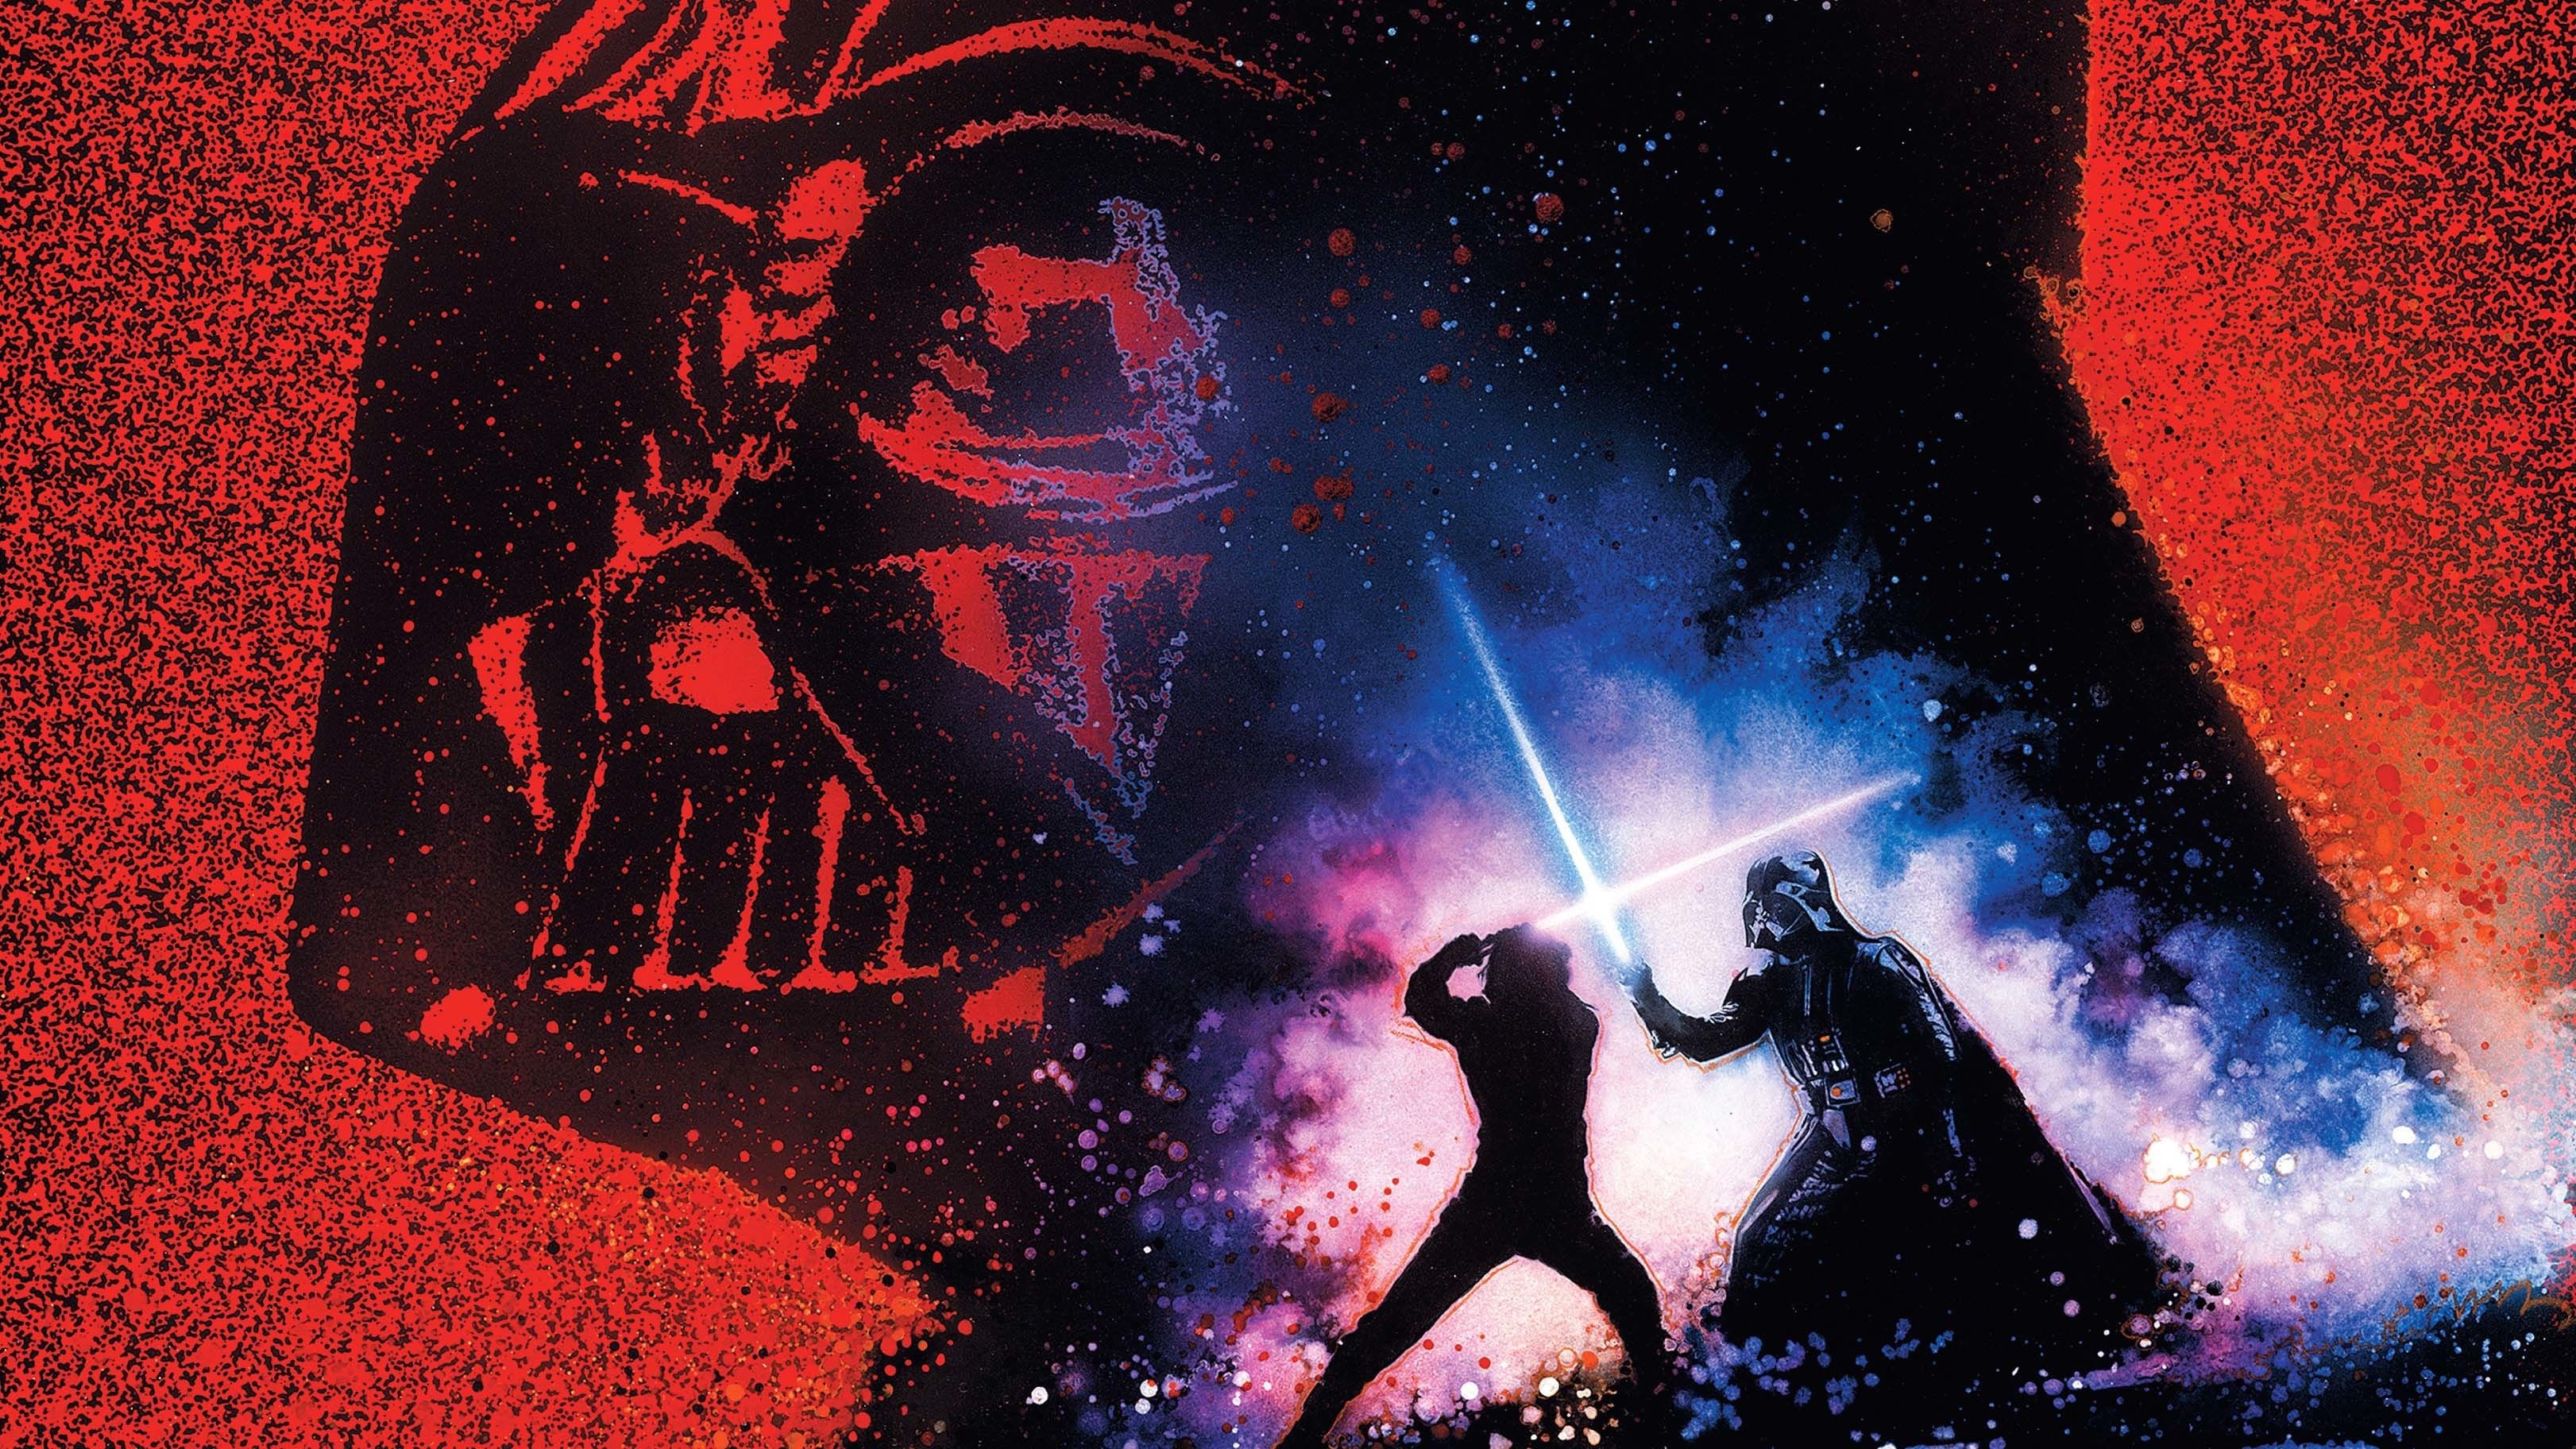 star wars animated wallpaper download